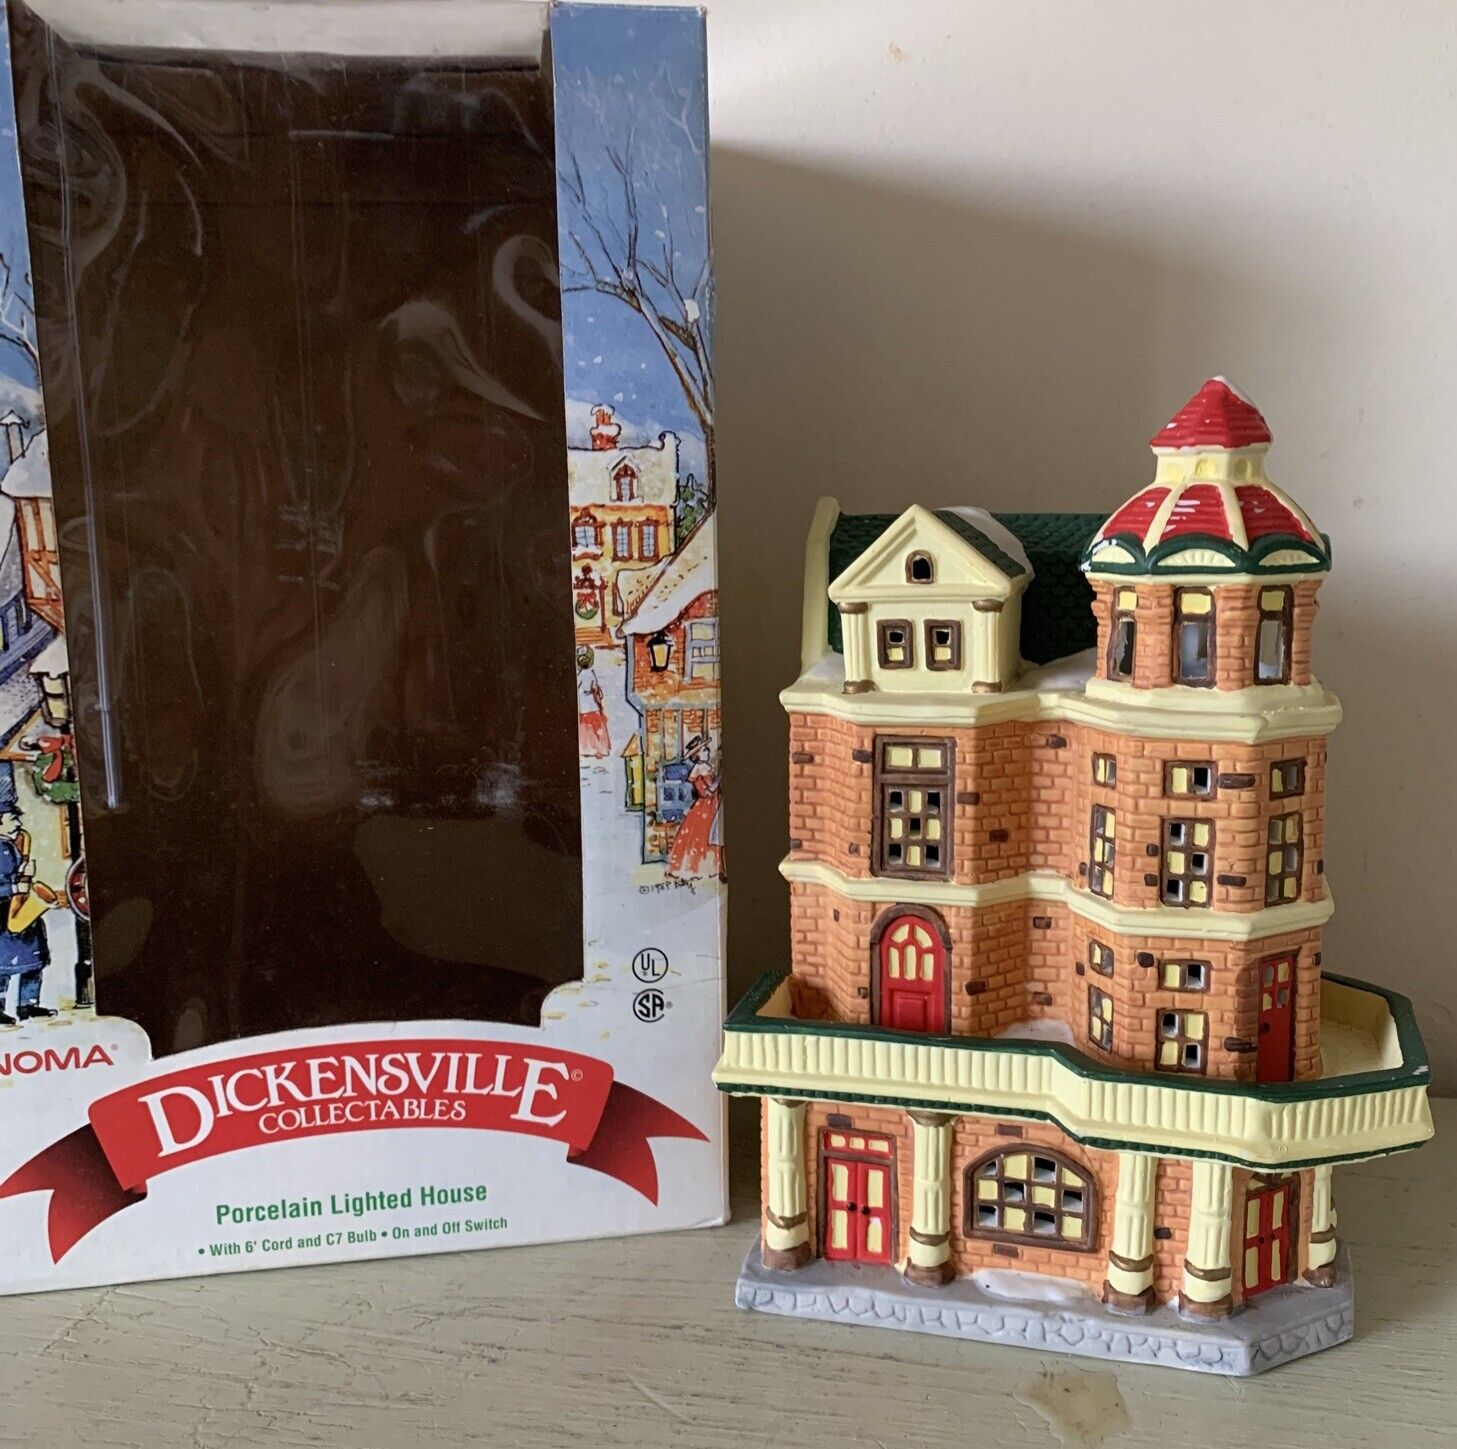 1990 Dickensville Collectables Noma Porcelain lighted house Maison Victorian